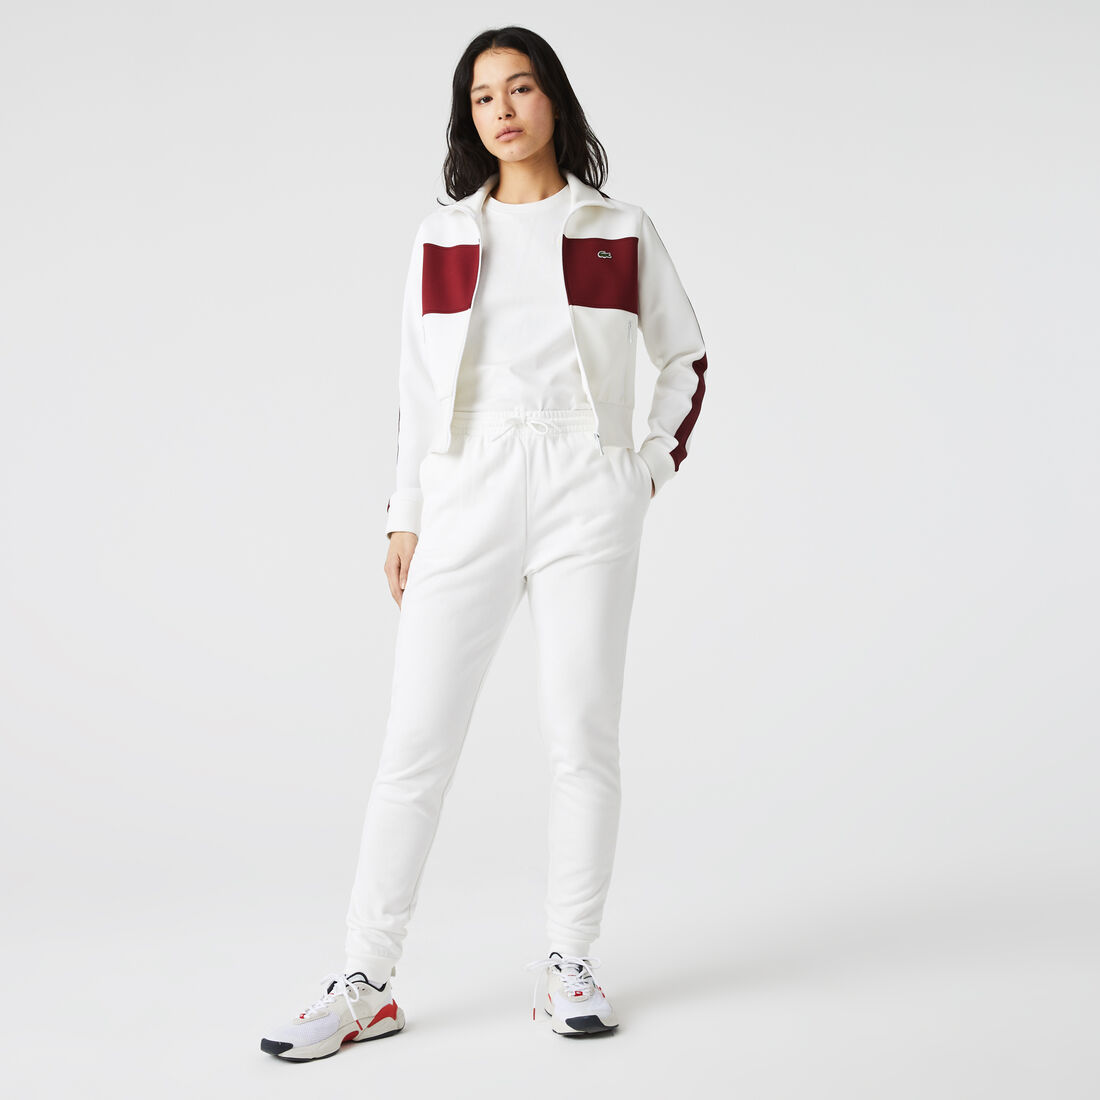 Online Pants Lacoste USA - Lacoste Clearance